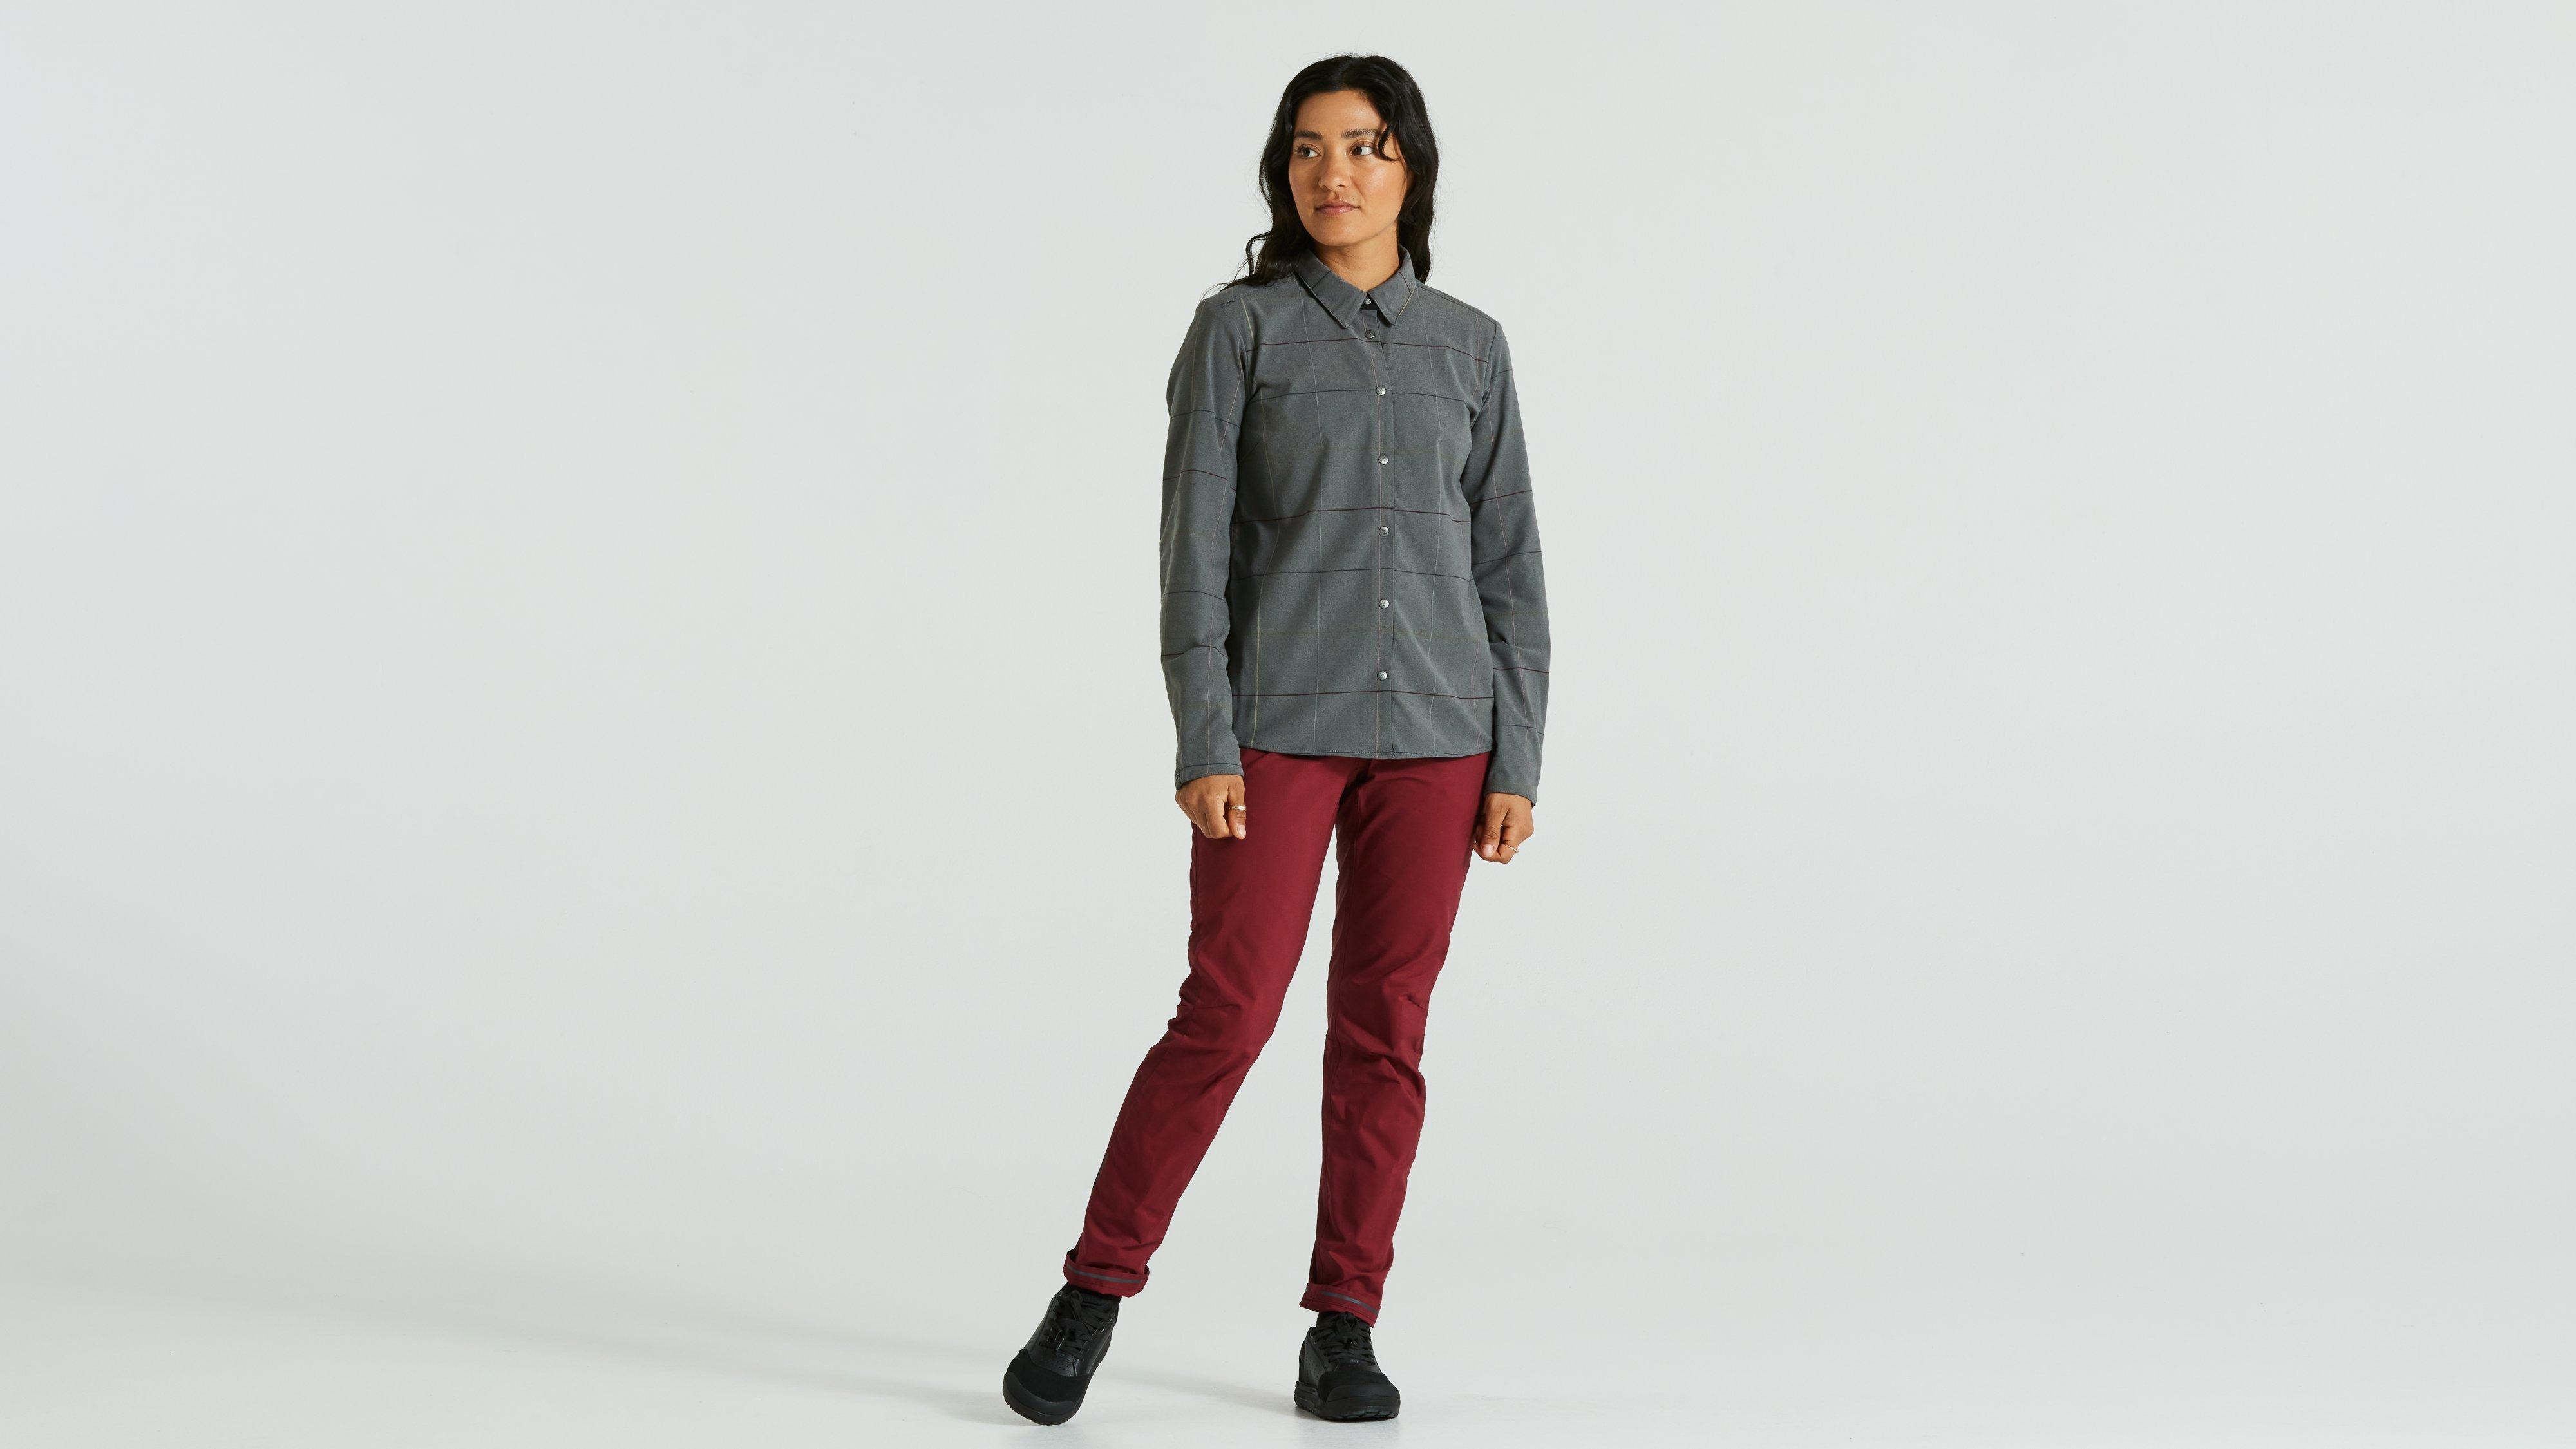 opvoeder accent Chaise longue Women's Specialized/Fjällräven Rider's Flannel Shirt | Specialized.com